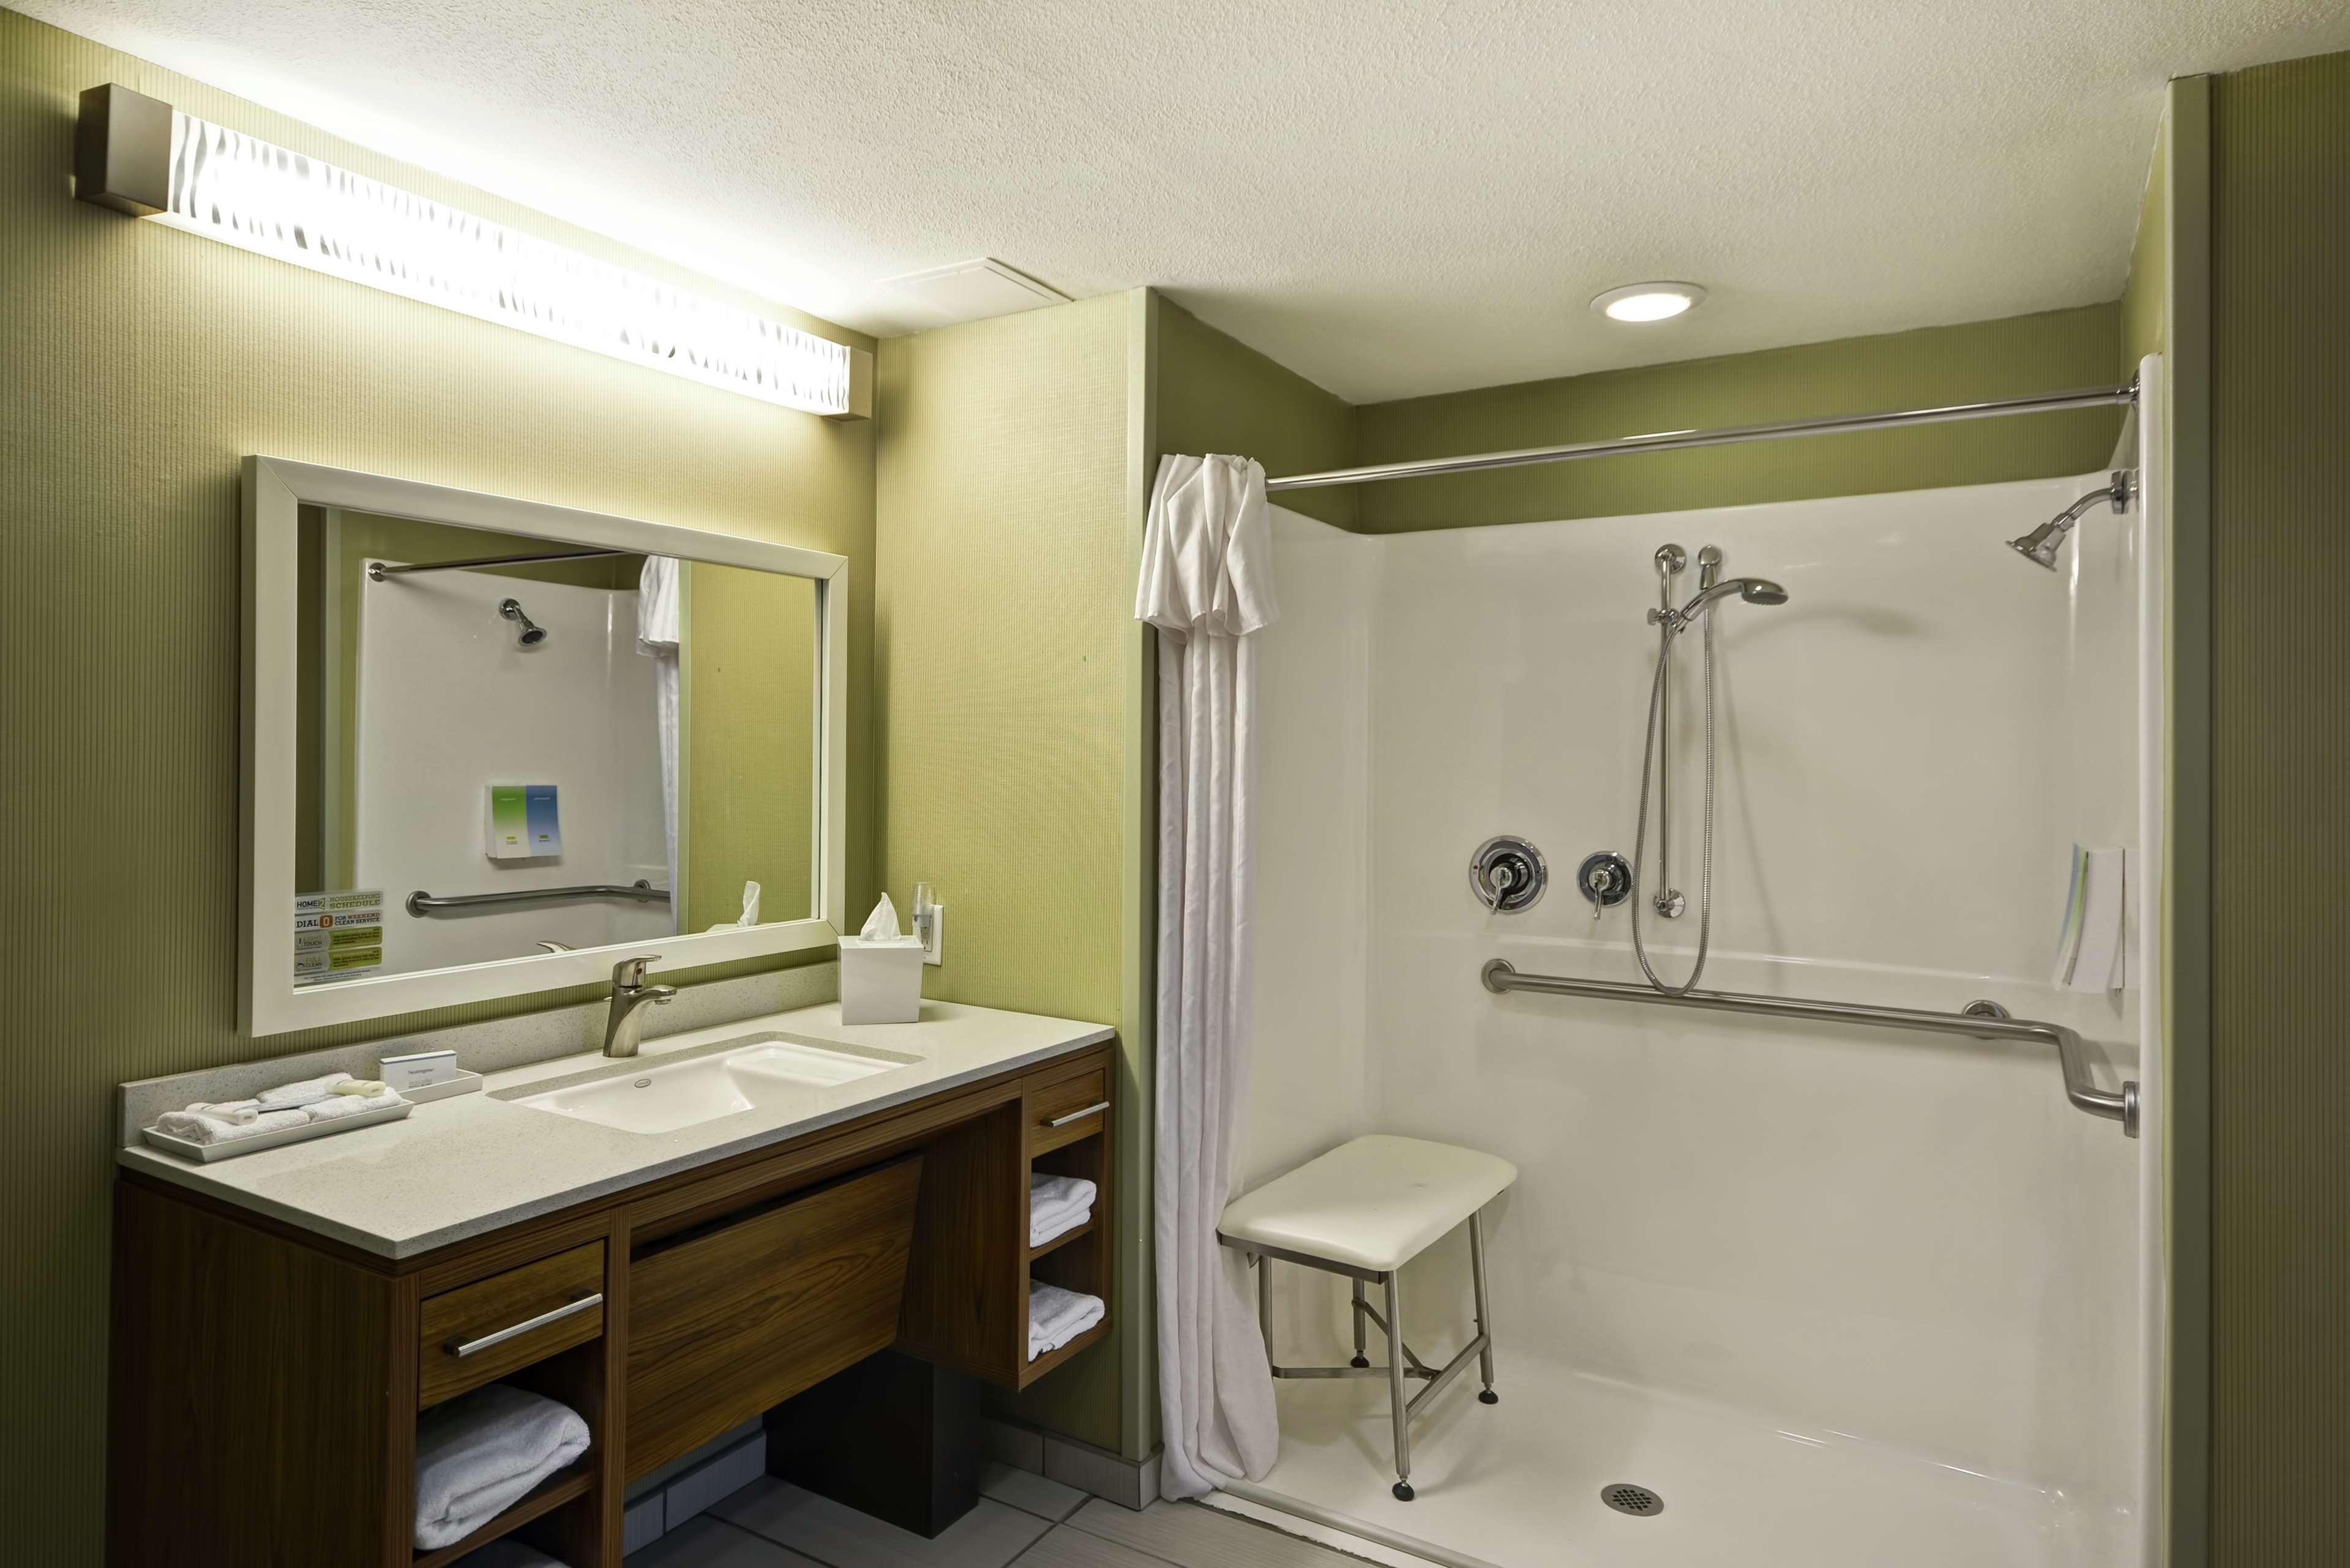 Home2 Suites By Hilton Rochester Henrietta, Ny Экстерьер фото